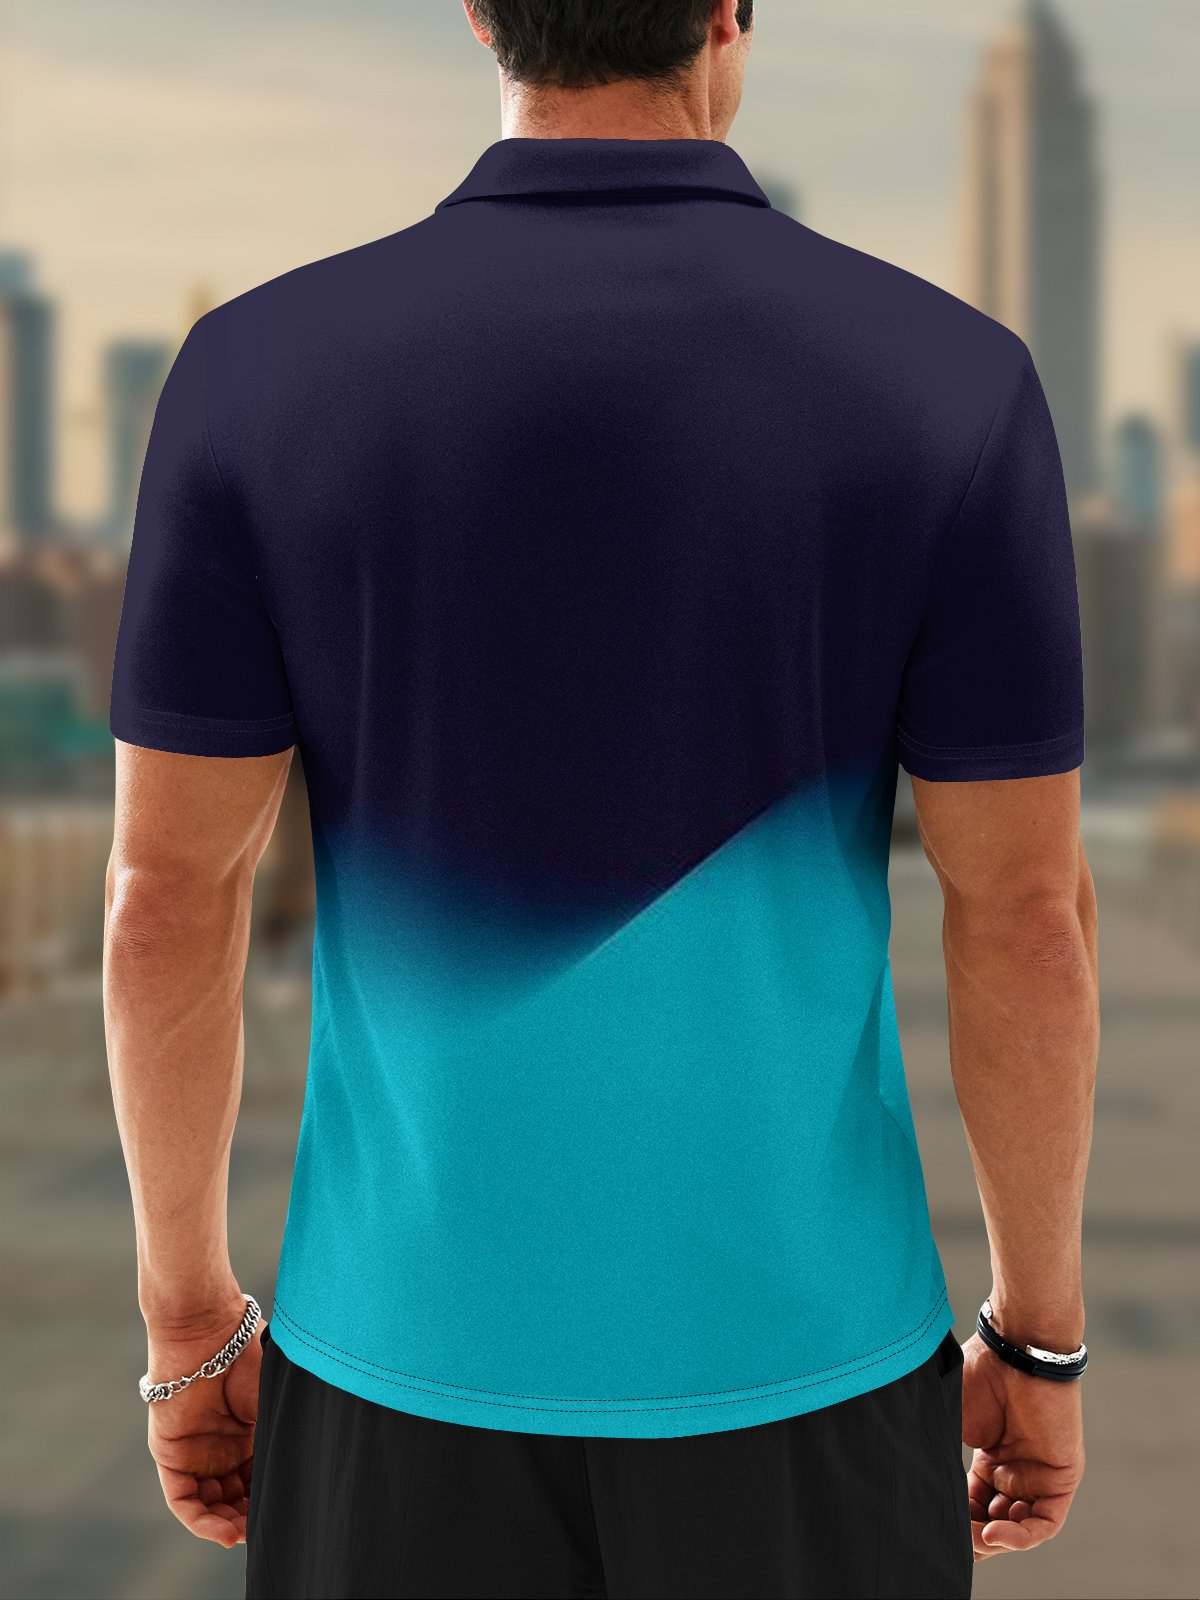 Moisture Wicking Golf Polo 3D Gradient Color Abstract